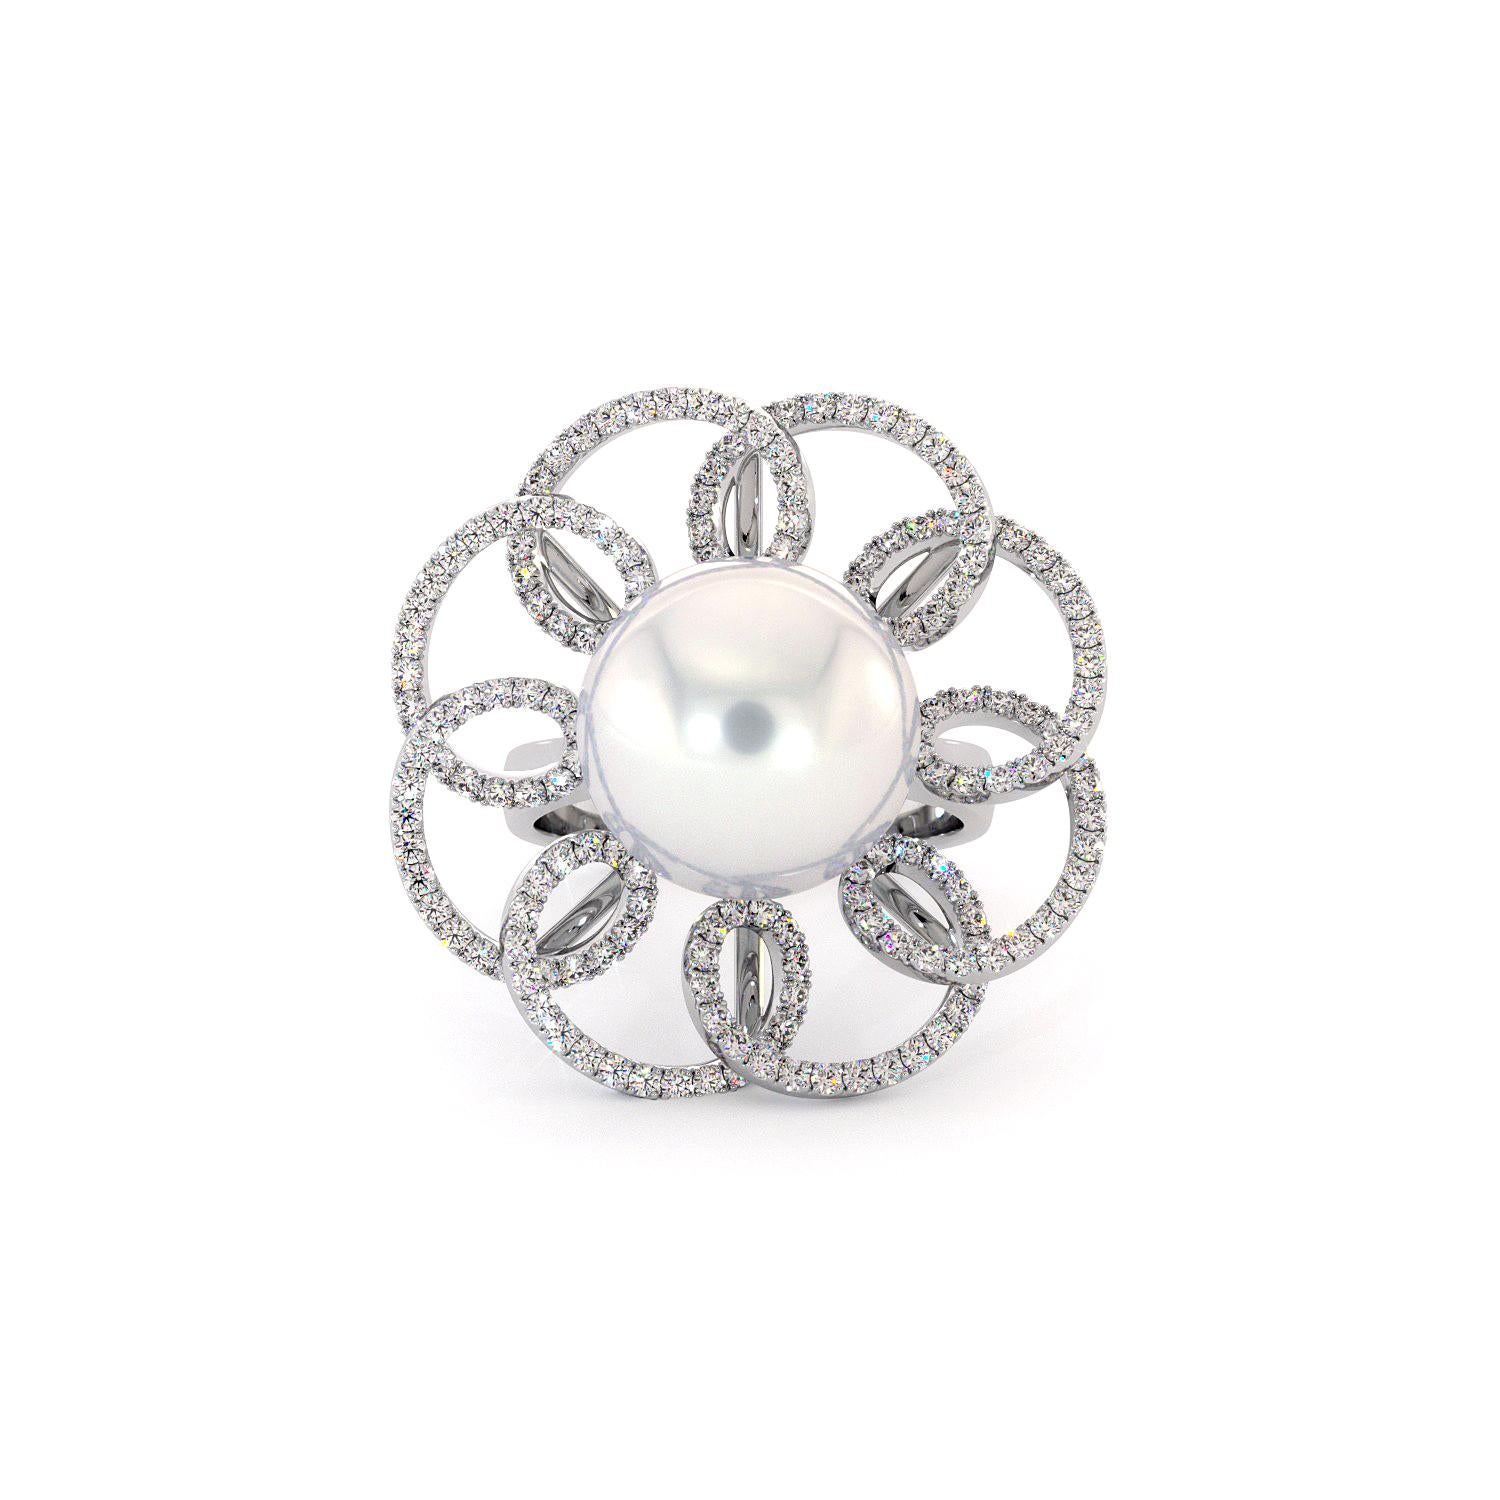 For Sale:  18K White Gold White South Sea Pearl Diamonds Ring by Emilia Lekarrier Certified 2